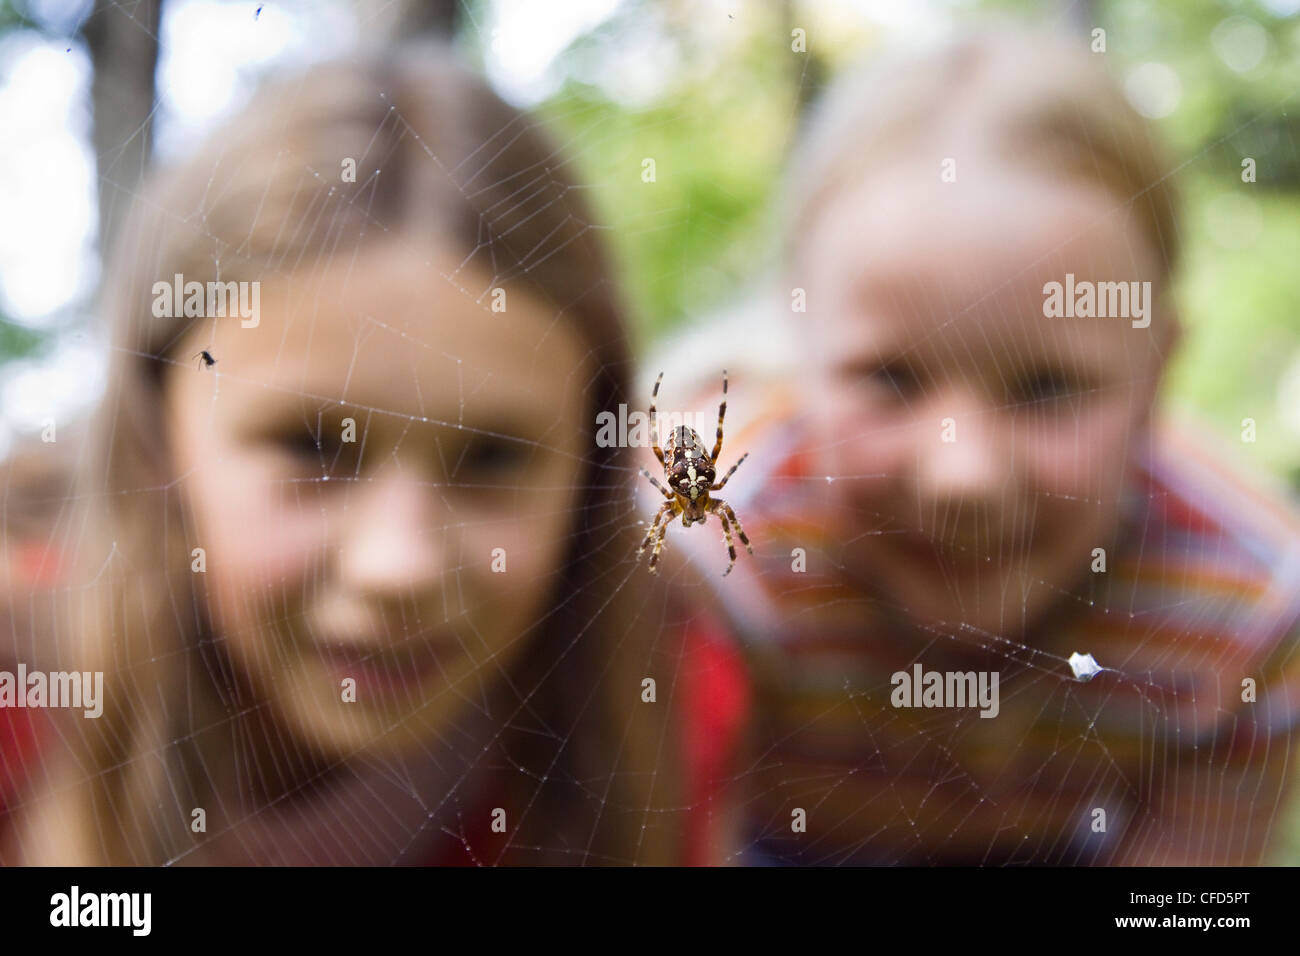 9 year old girls looking at a garden spider in the web, Upper Bavaria, Germany, Europe Stock Photo